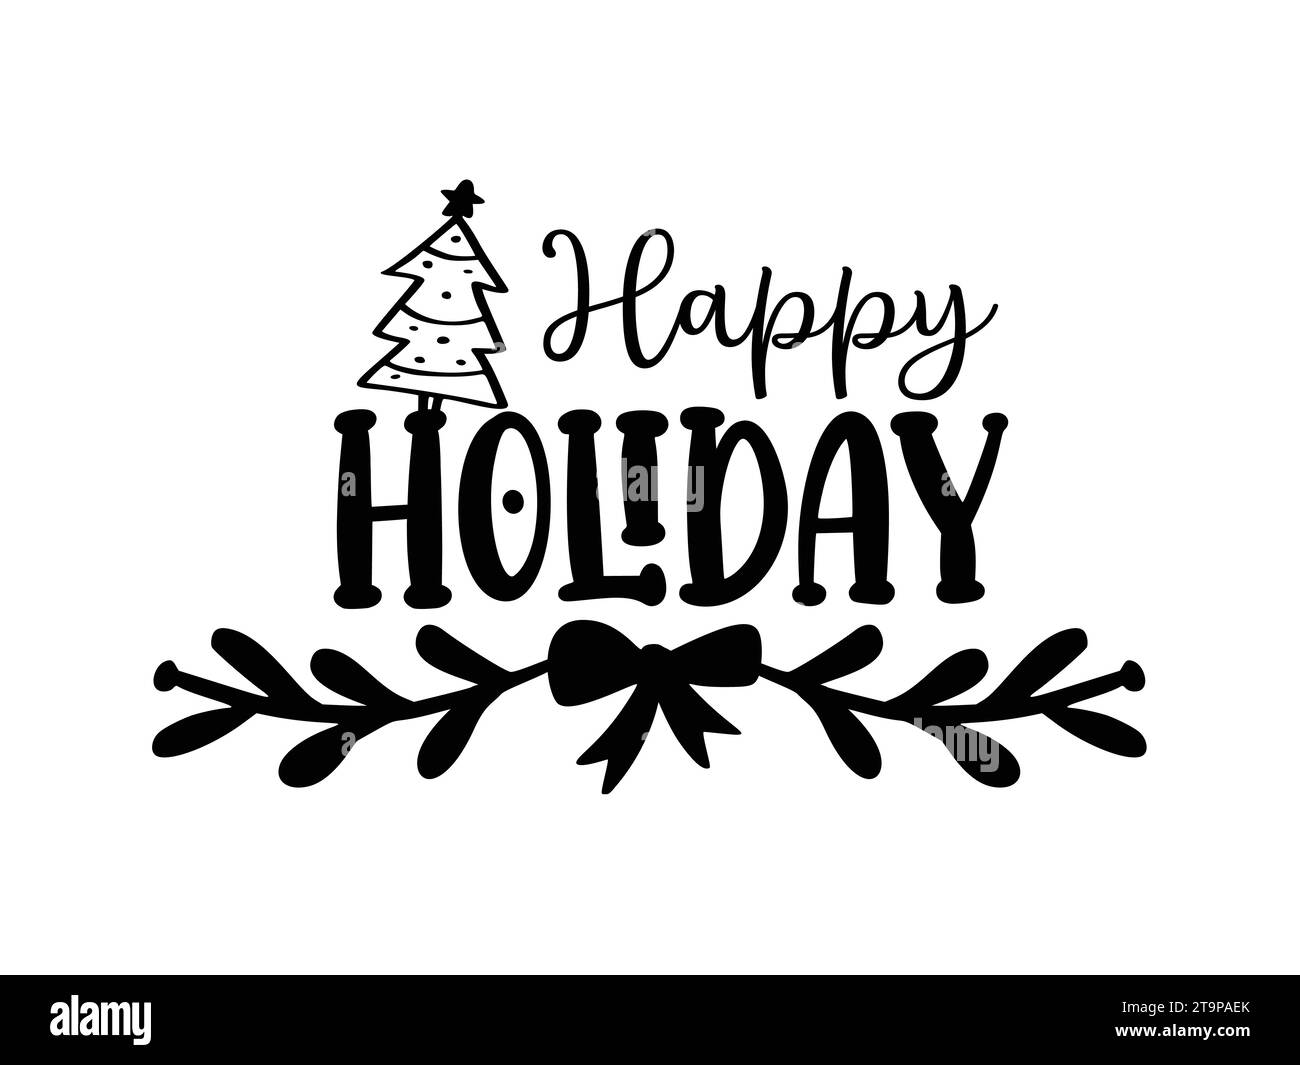 Silhouette Christmas Happy Holiday sublimation illustration Stock Vector